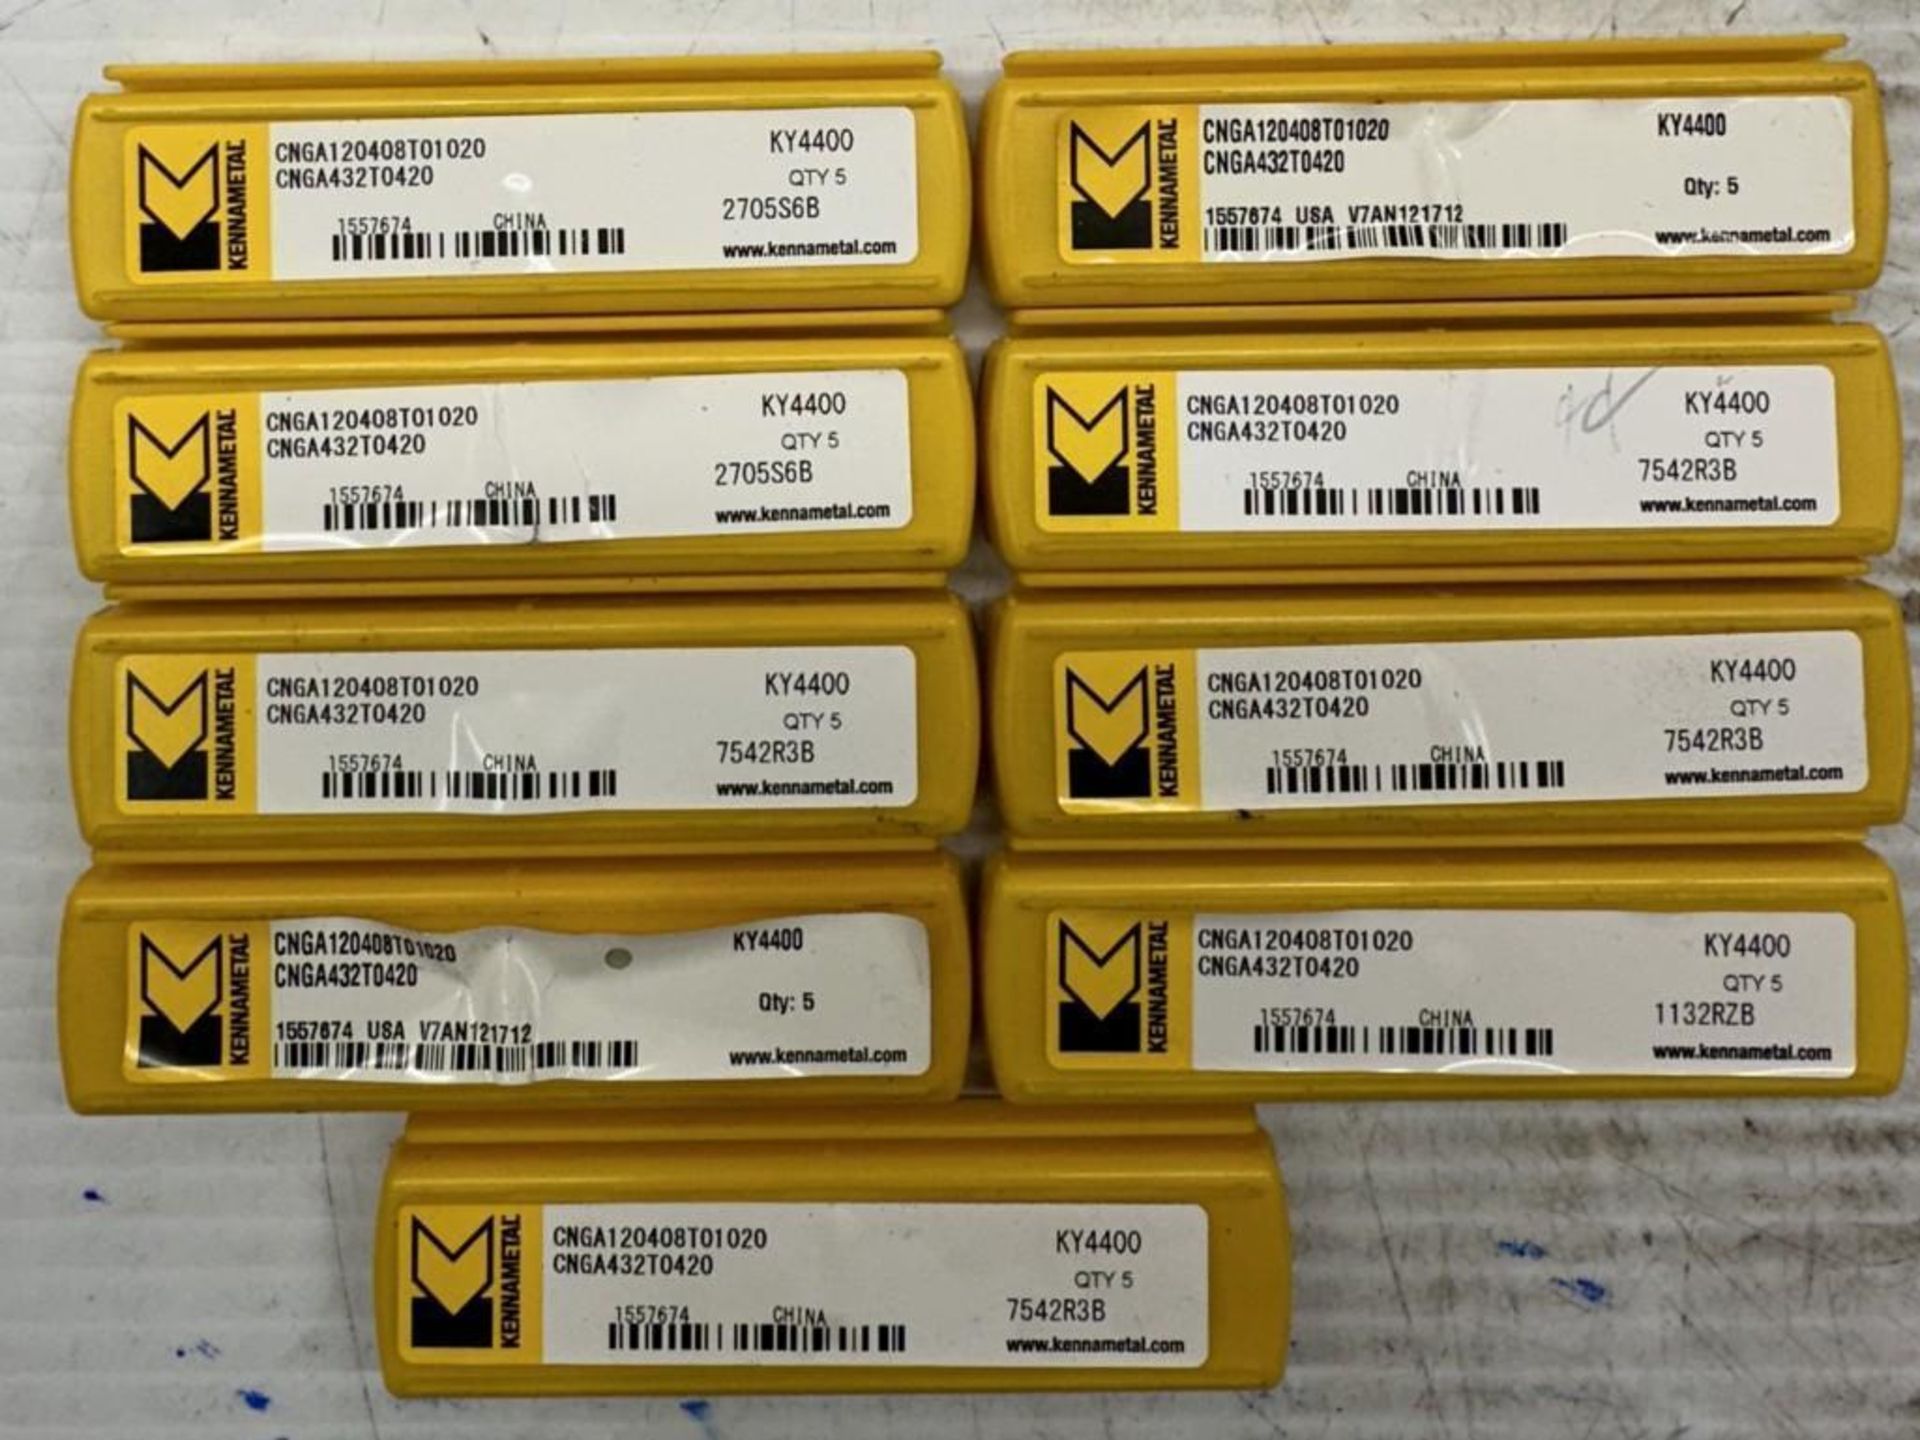 Lot of Kennametal #CNGA120408T01020/KY4400 Carbide Inserts - Image 3 of 3